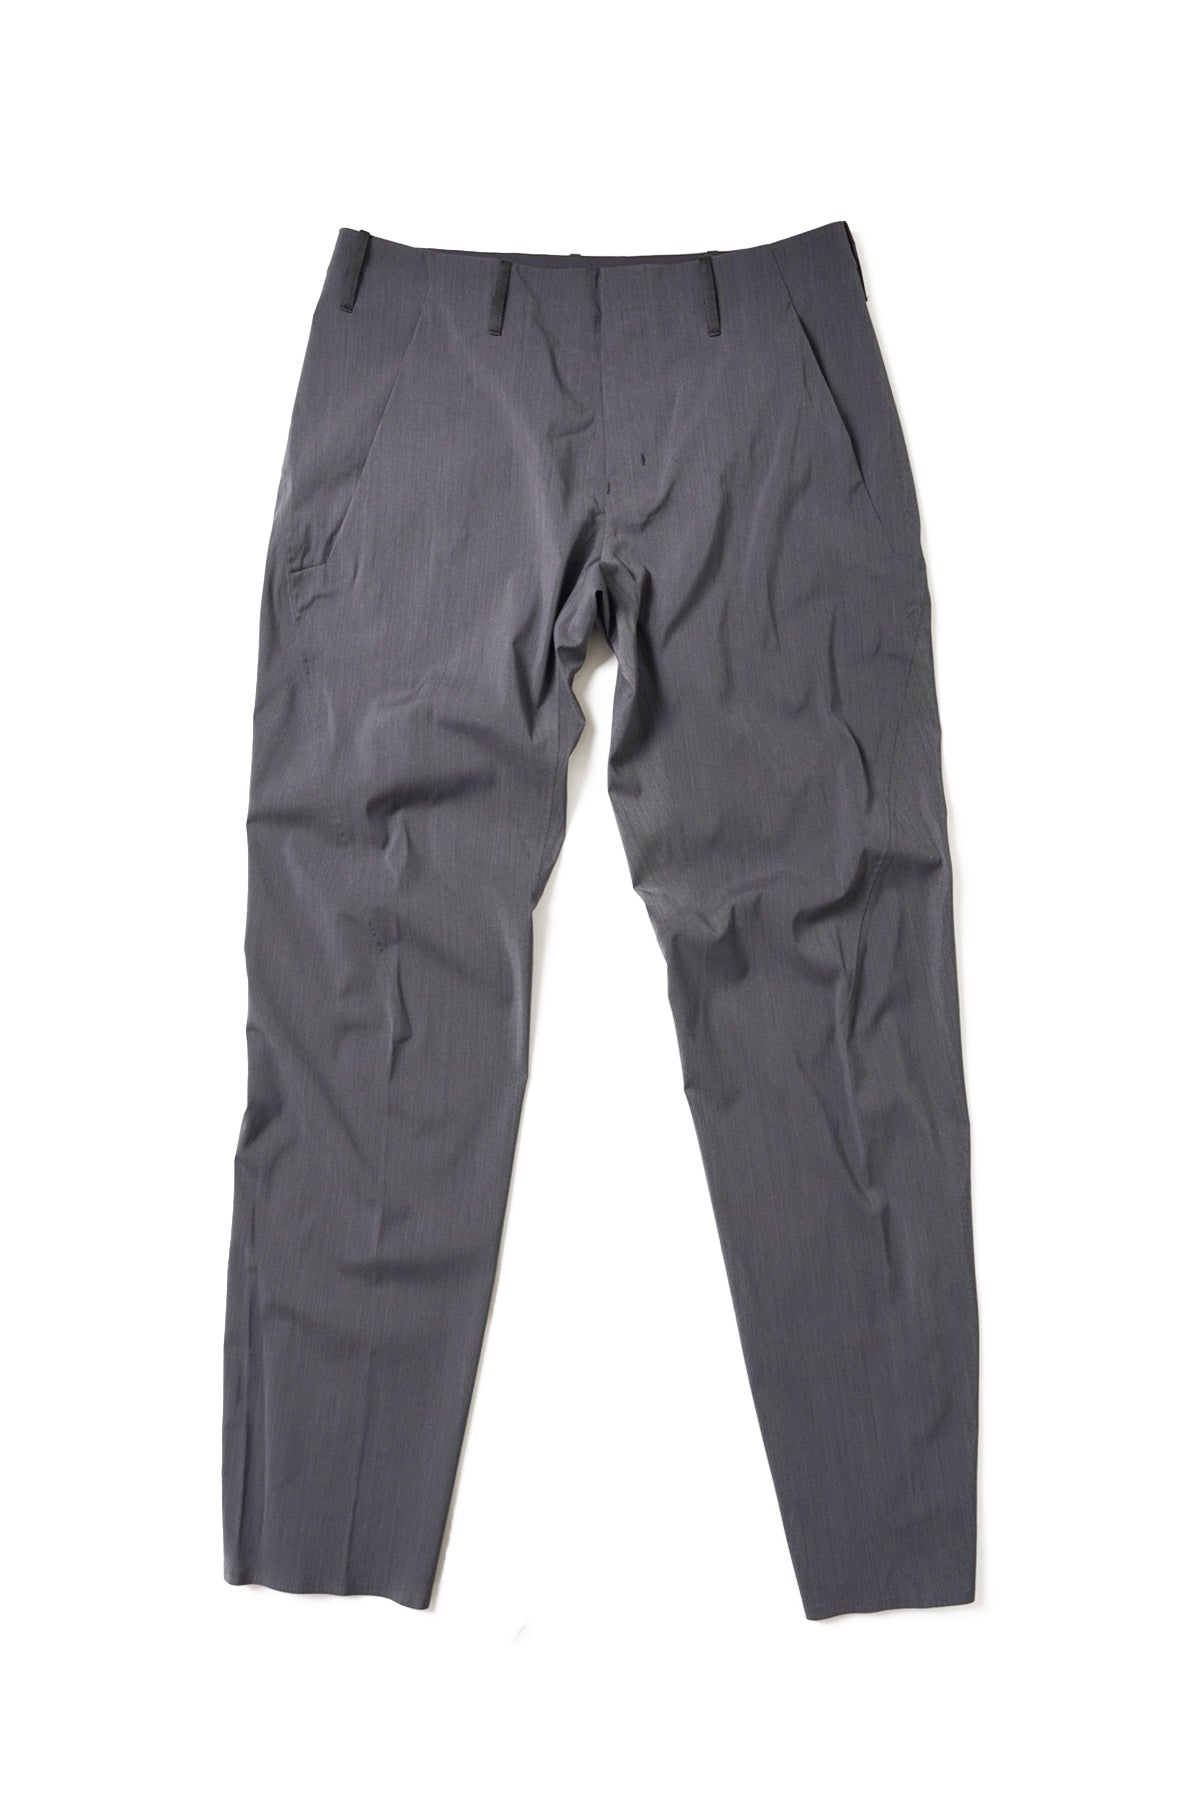 Indisce Tech Wool Pant